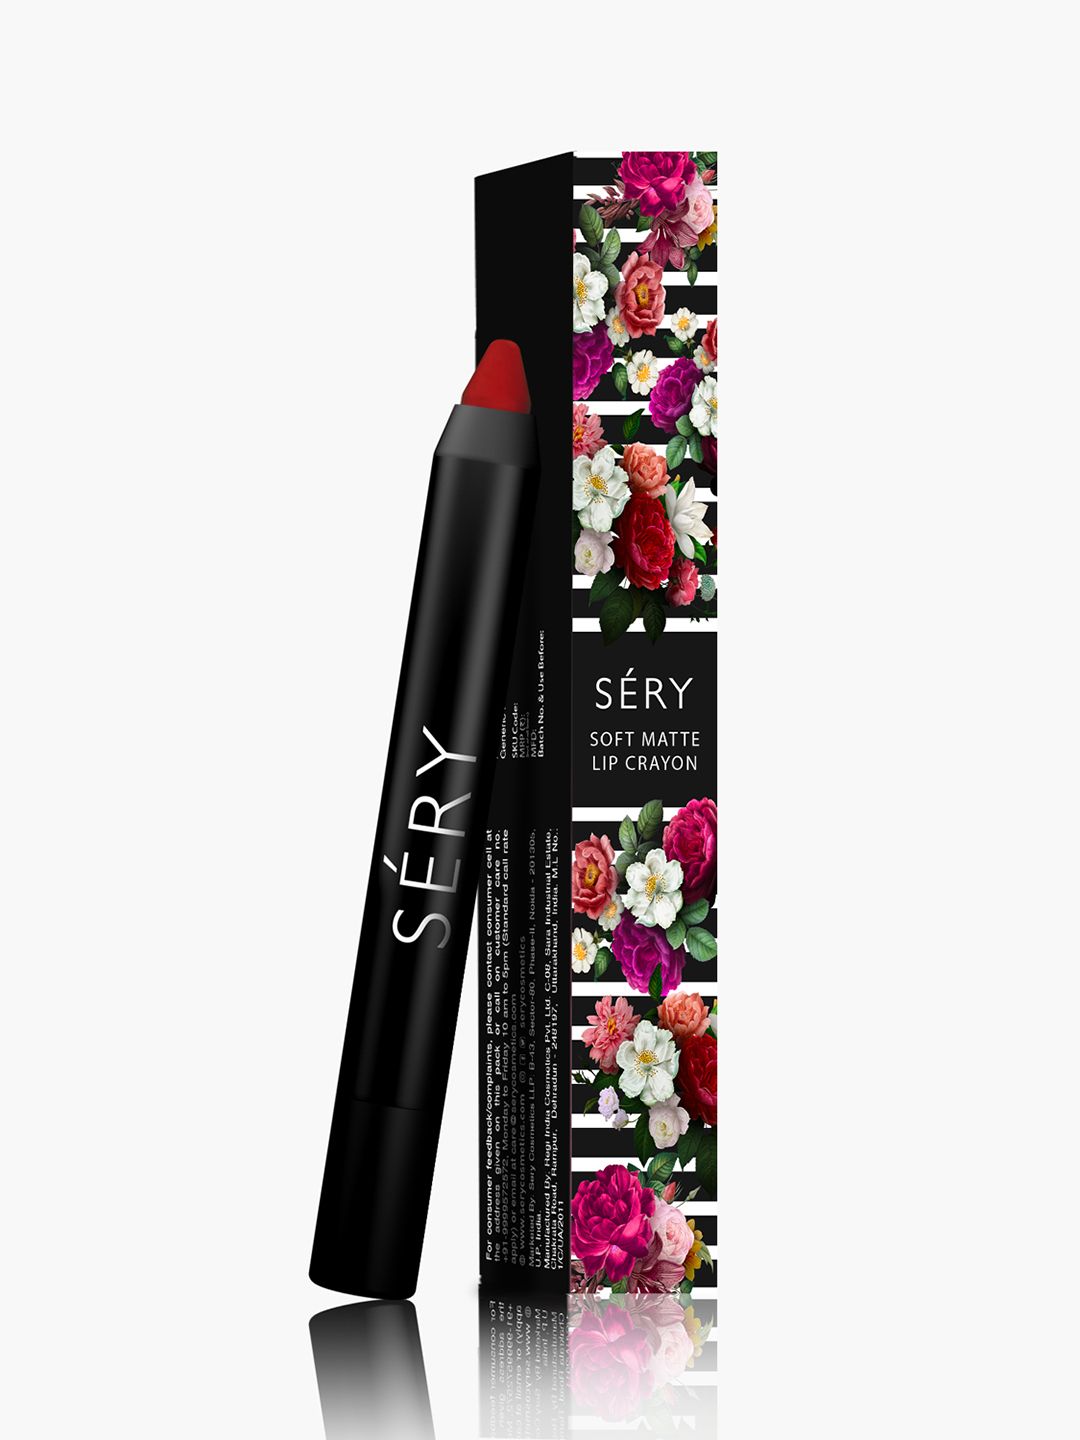 SERY Soft Matte Lip Crayon with Creamy Matte Texture 2.4 g - Peach Nude Price in India